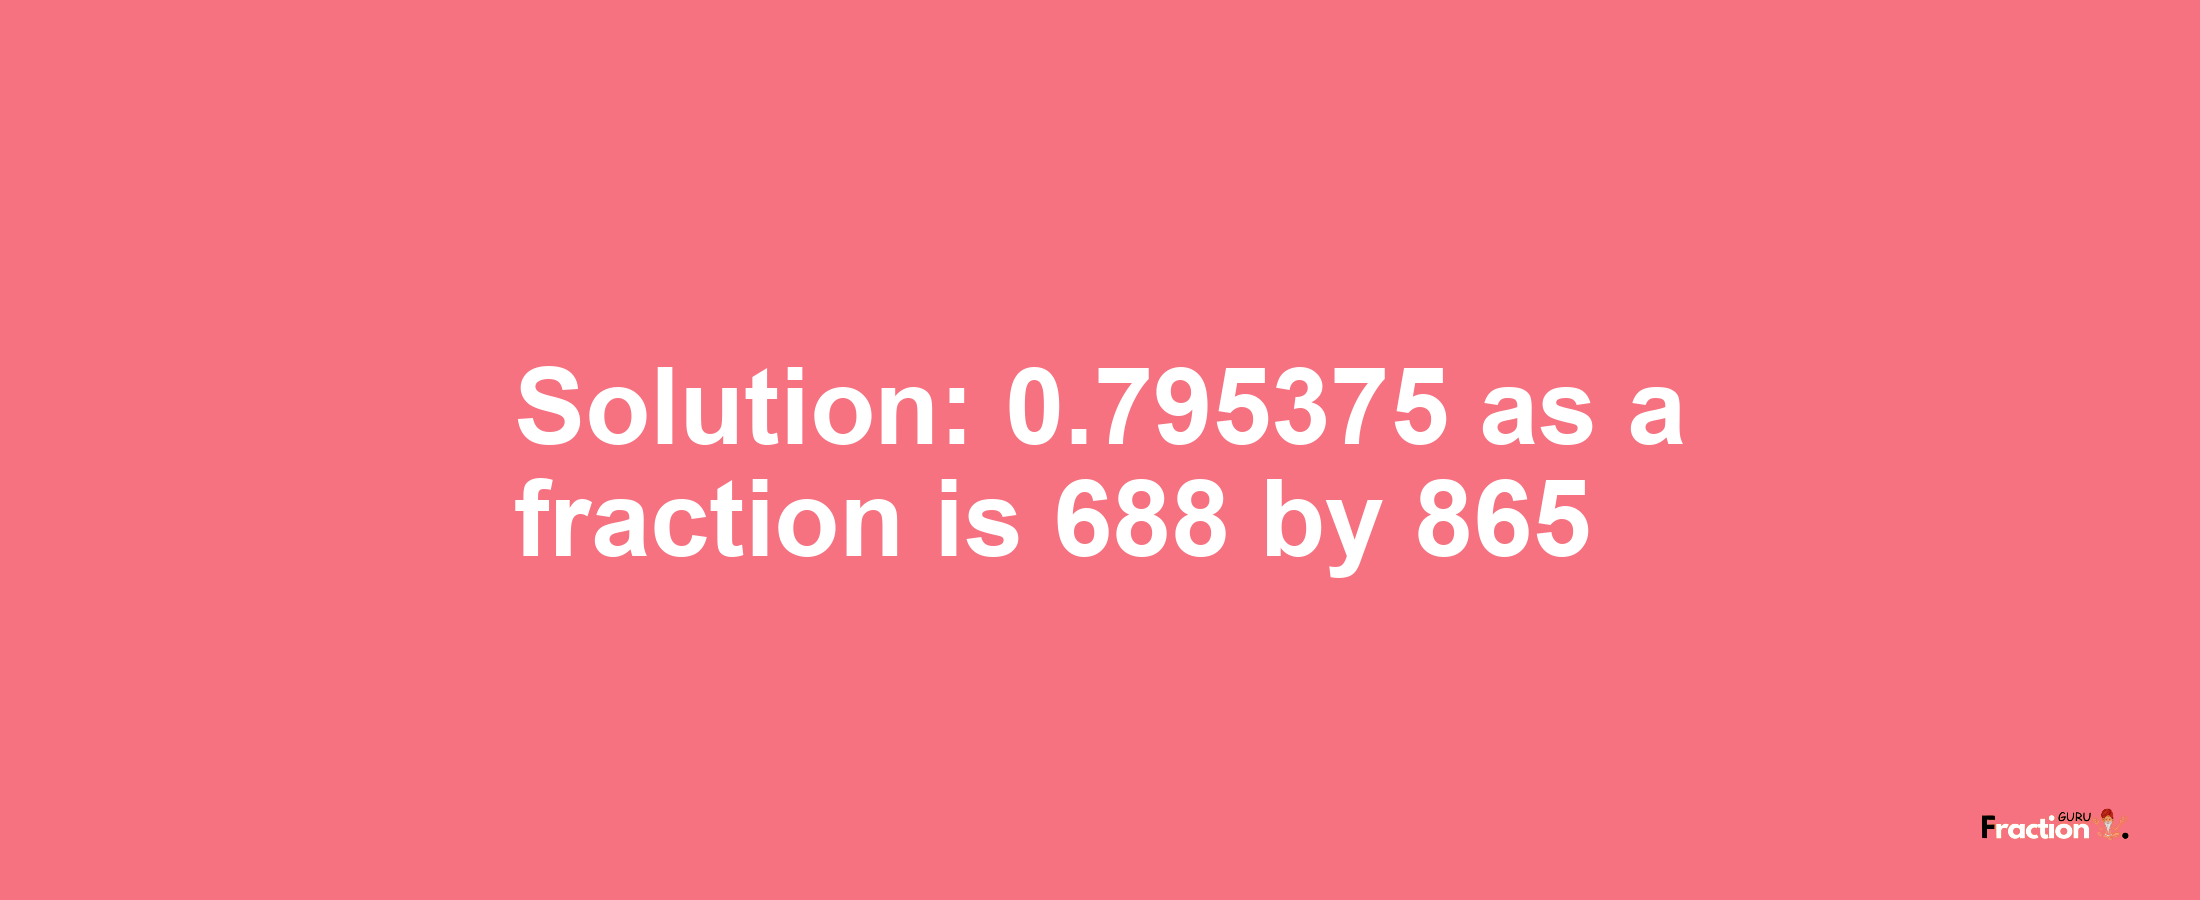 Solution:0.795375 as a fraction is 688/865